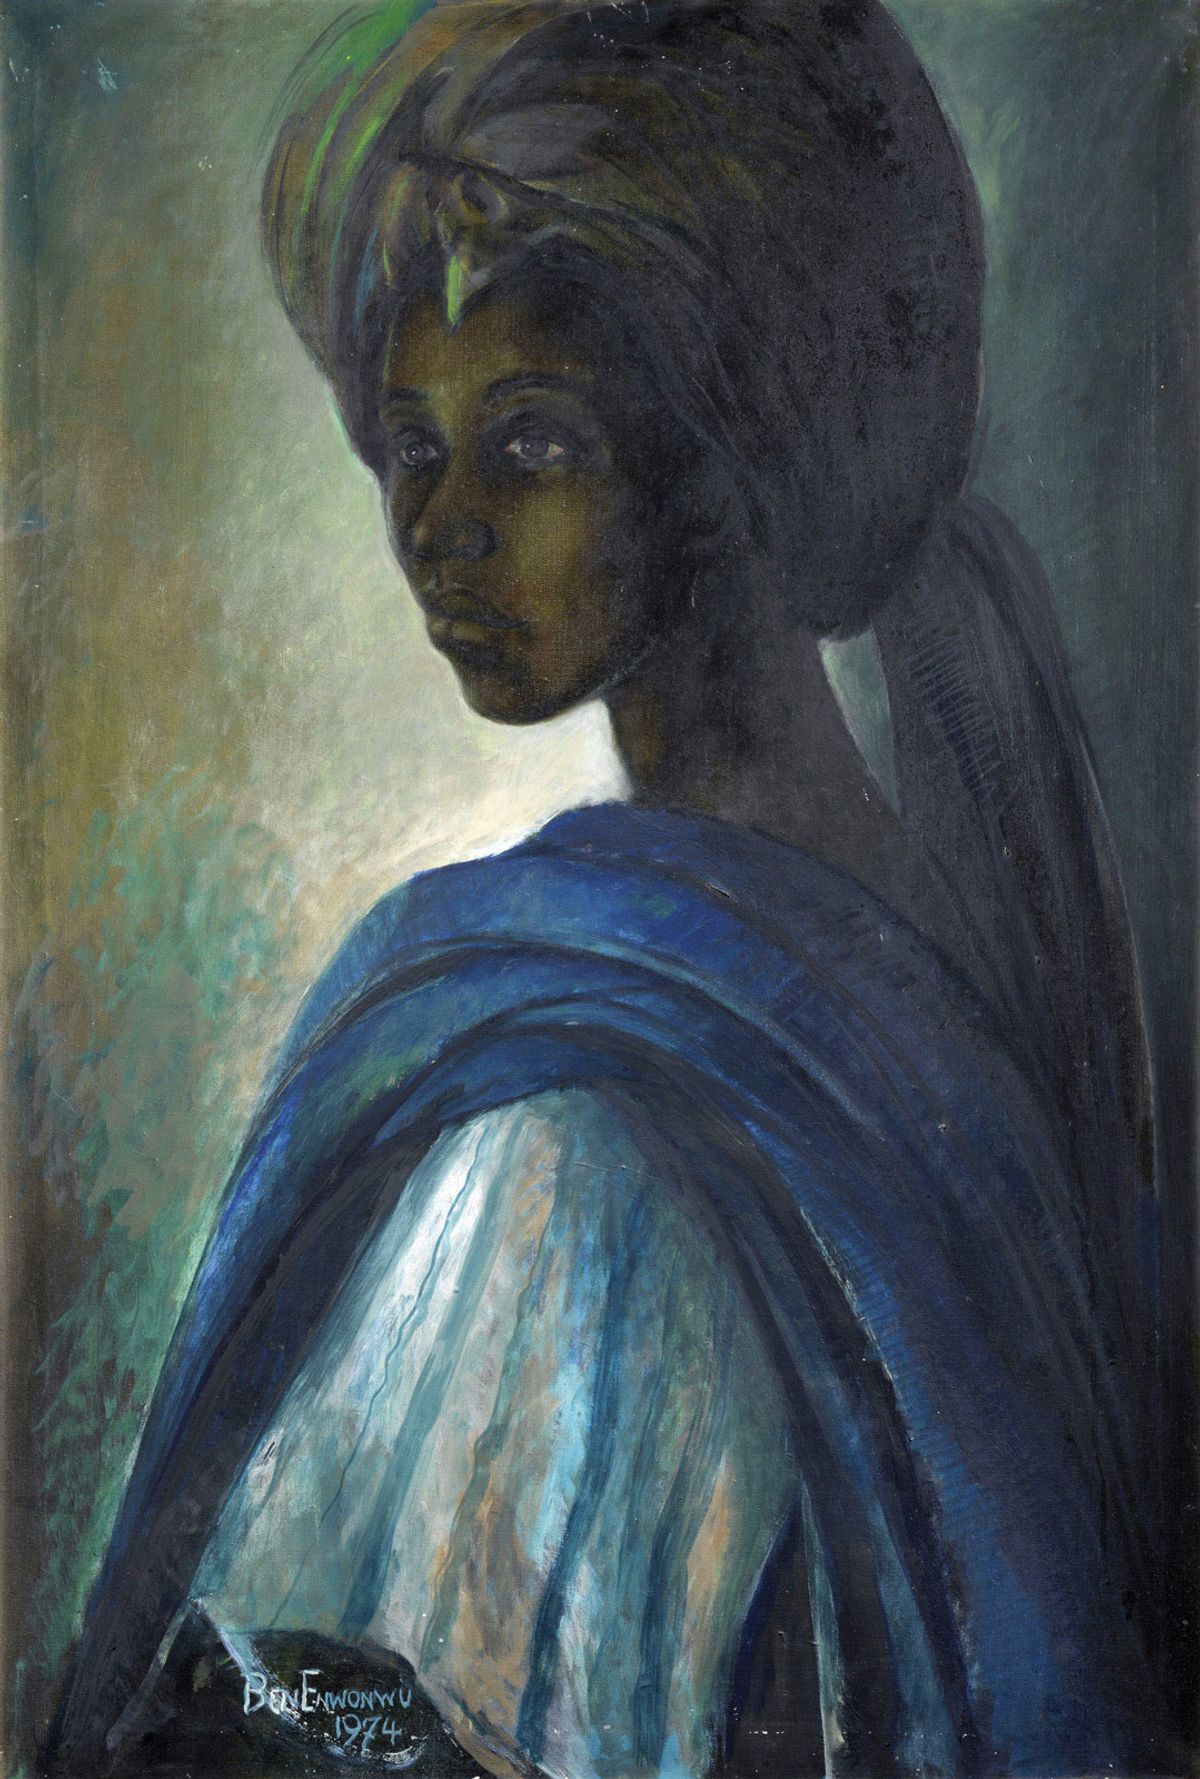 Nigerian artist Ben Enwonwu's Tutu (1974) was sold at Bonhams London for £1.2m in February 2018. The sale was livestreamed to a Lagos hotel to allow Nigerian bidders to participate Courtesy of Bonhams